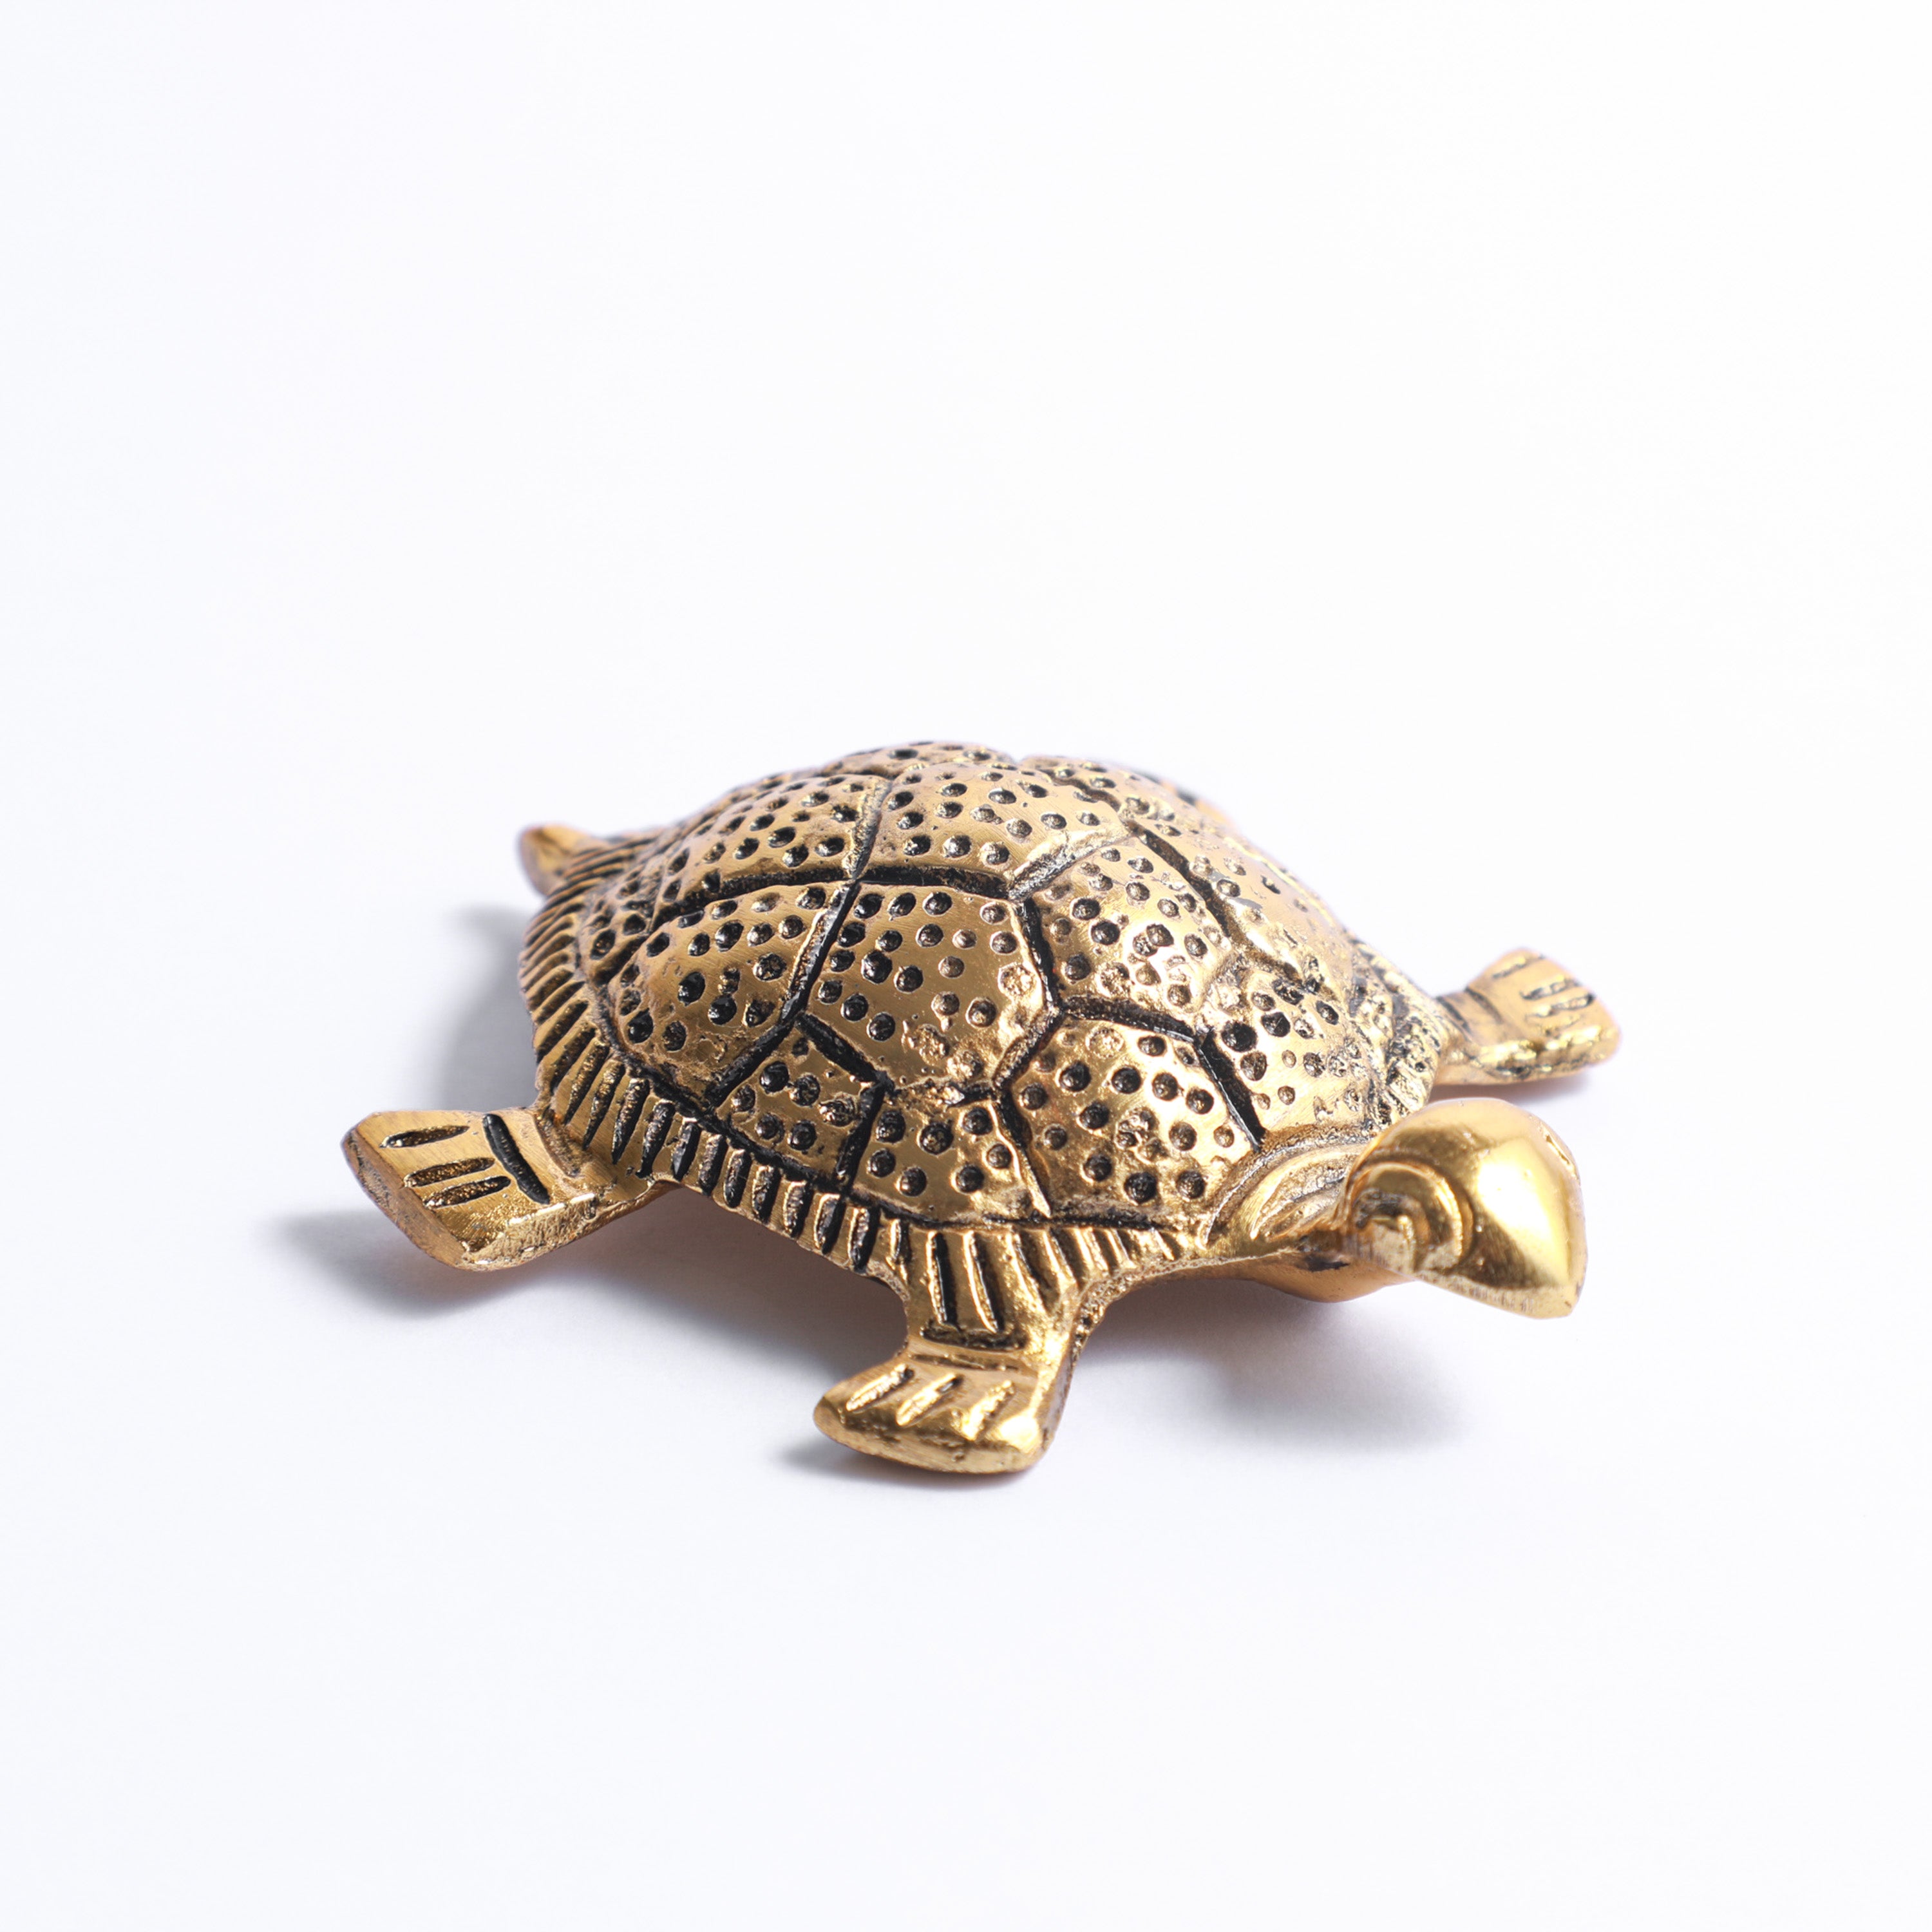 Gold tortoise for feng shui in the USA